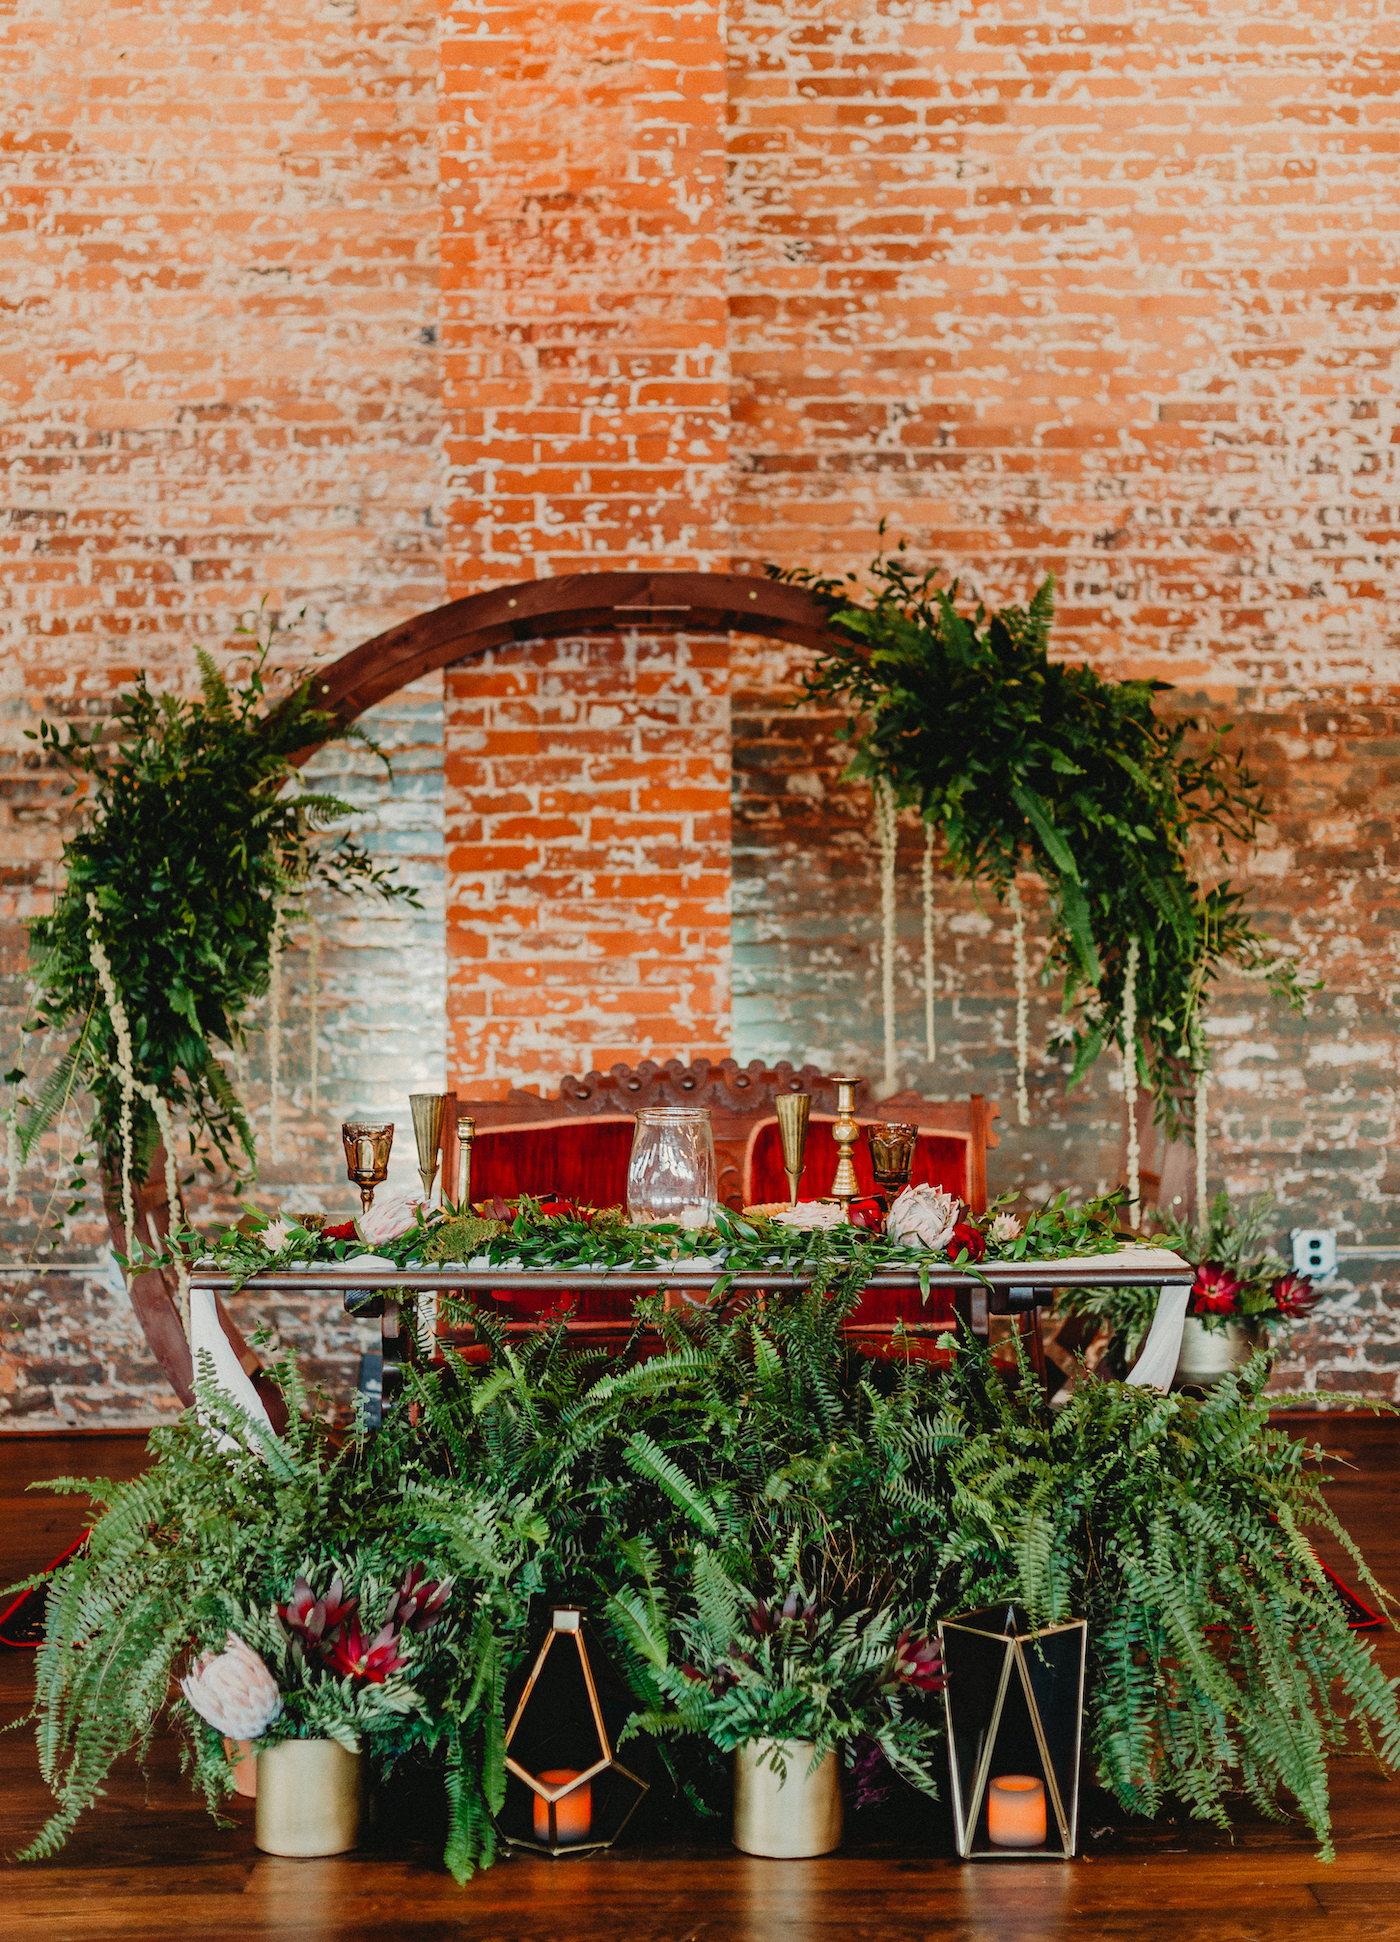 Bride and Groom Wedding Sweetheart Table with Red Vintage Loveseat | Round Moon Arch with Greenery Wedding Floral Arrangements with Potted Ferns and Gold Geometric Candle Lanterns